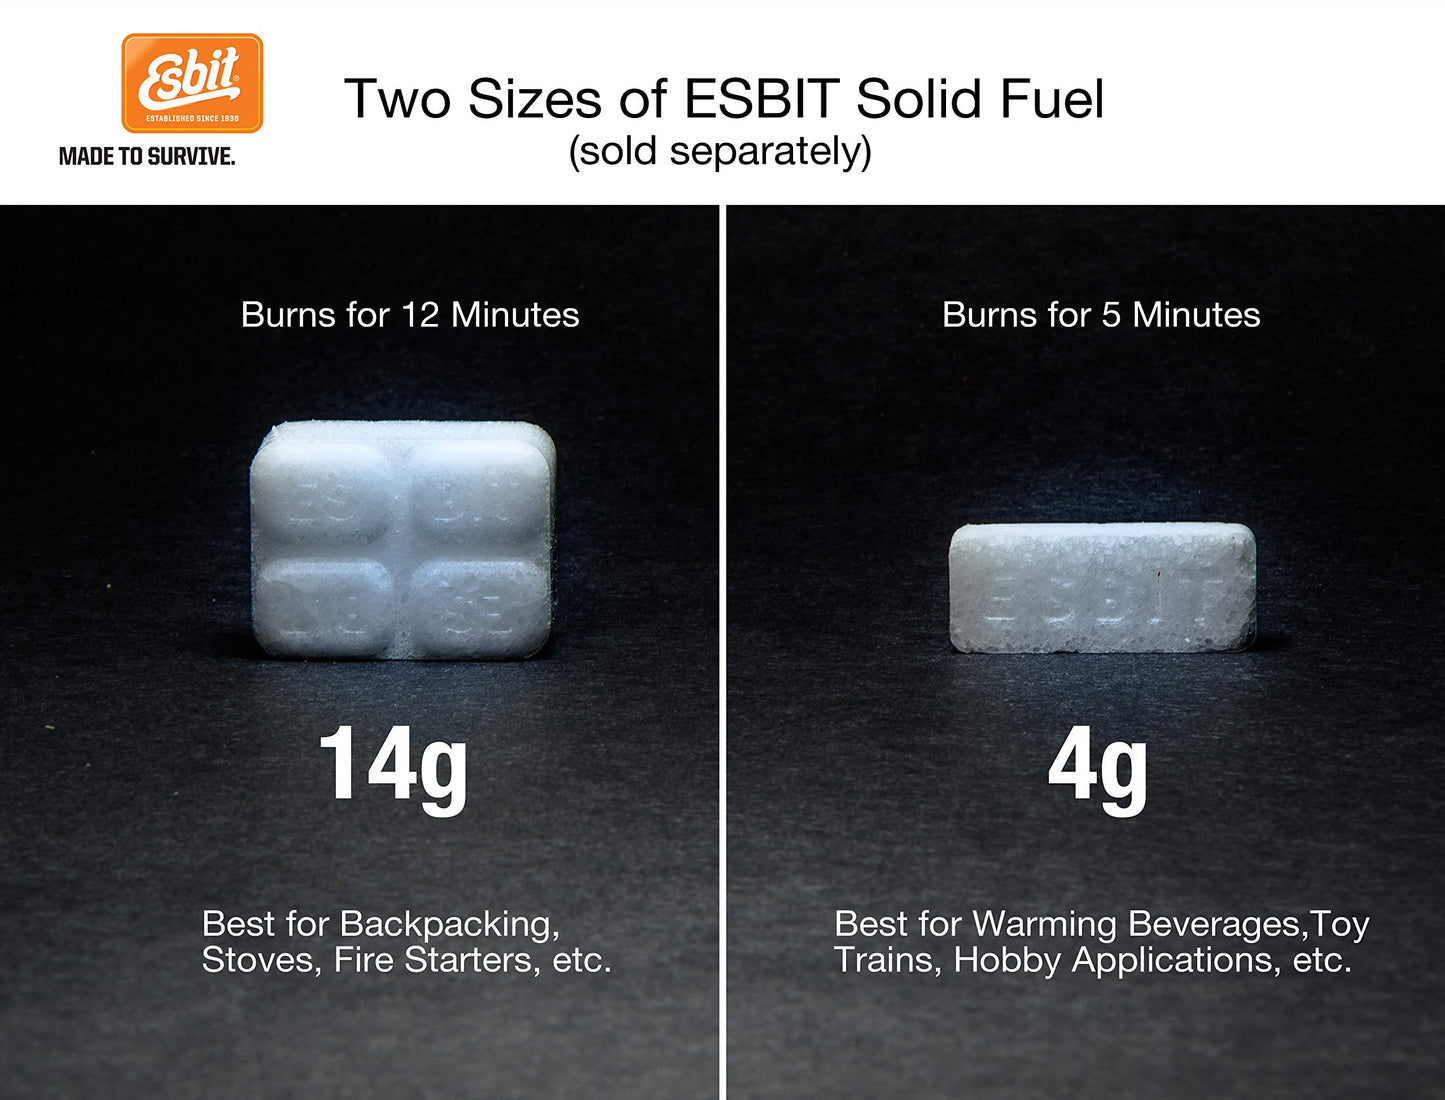 Esbit 4g Solid Fuel Tablets for Backpacking & Camping Stoves & Grills, 1300-Degree Smokeless Emergency Fire Starter Squares, 20 Pack